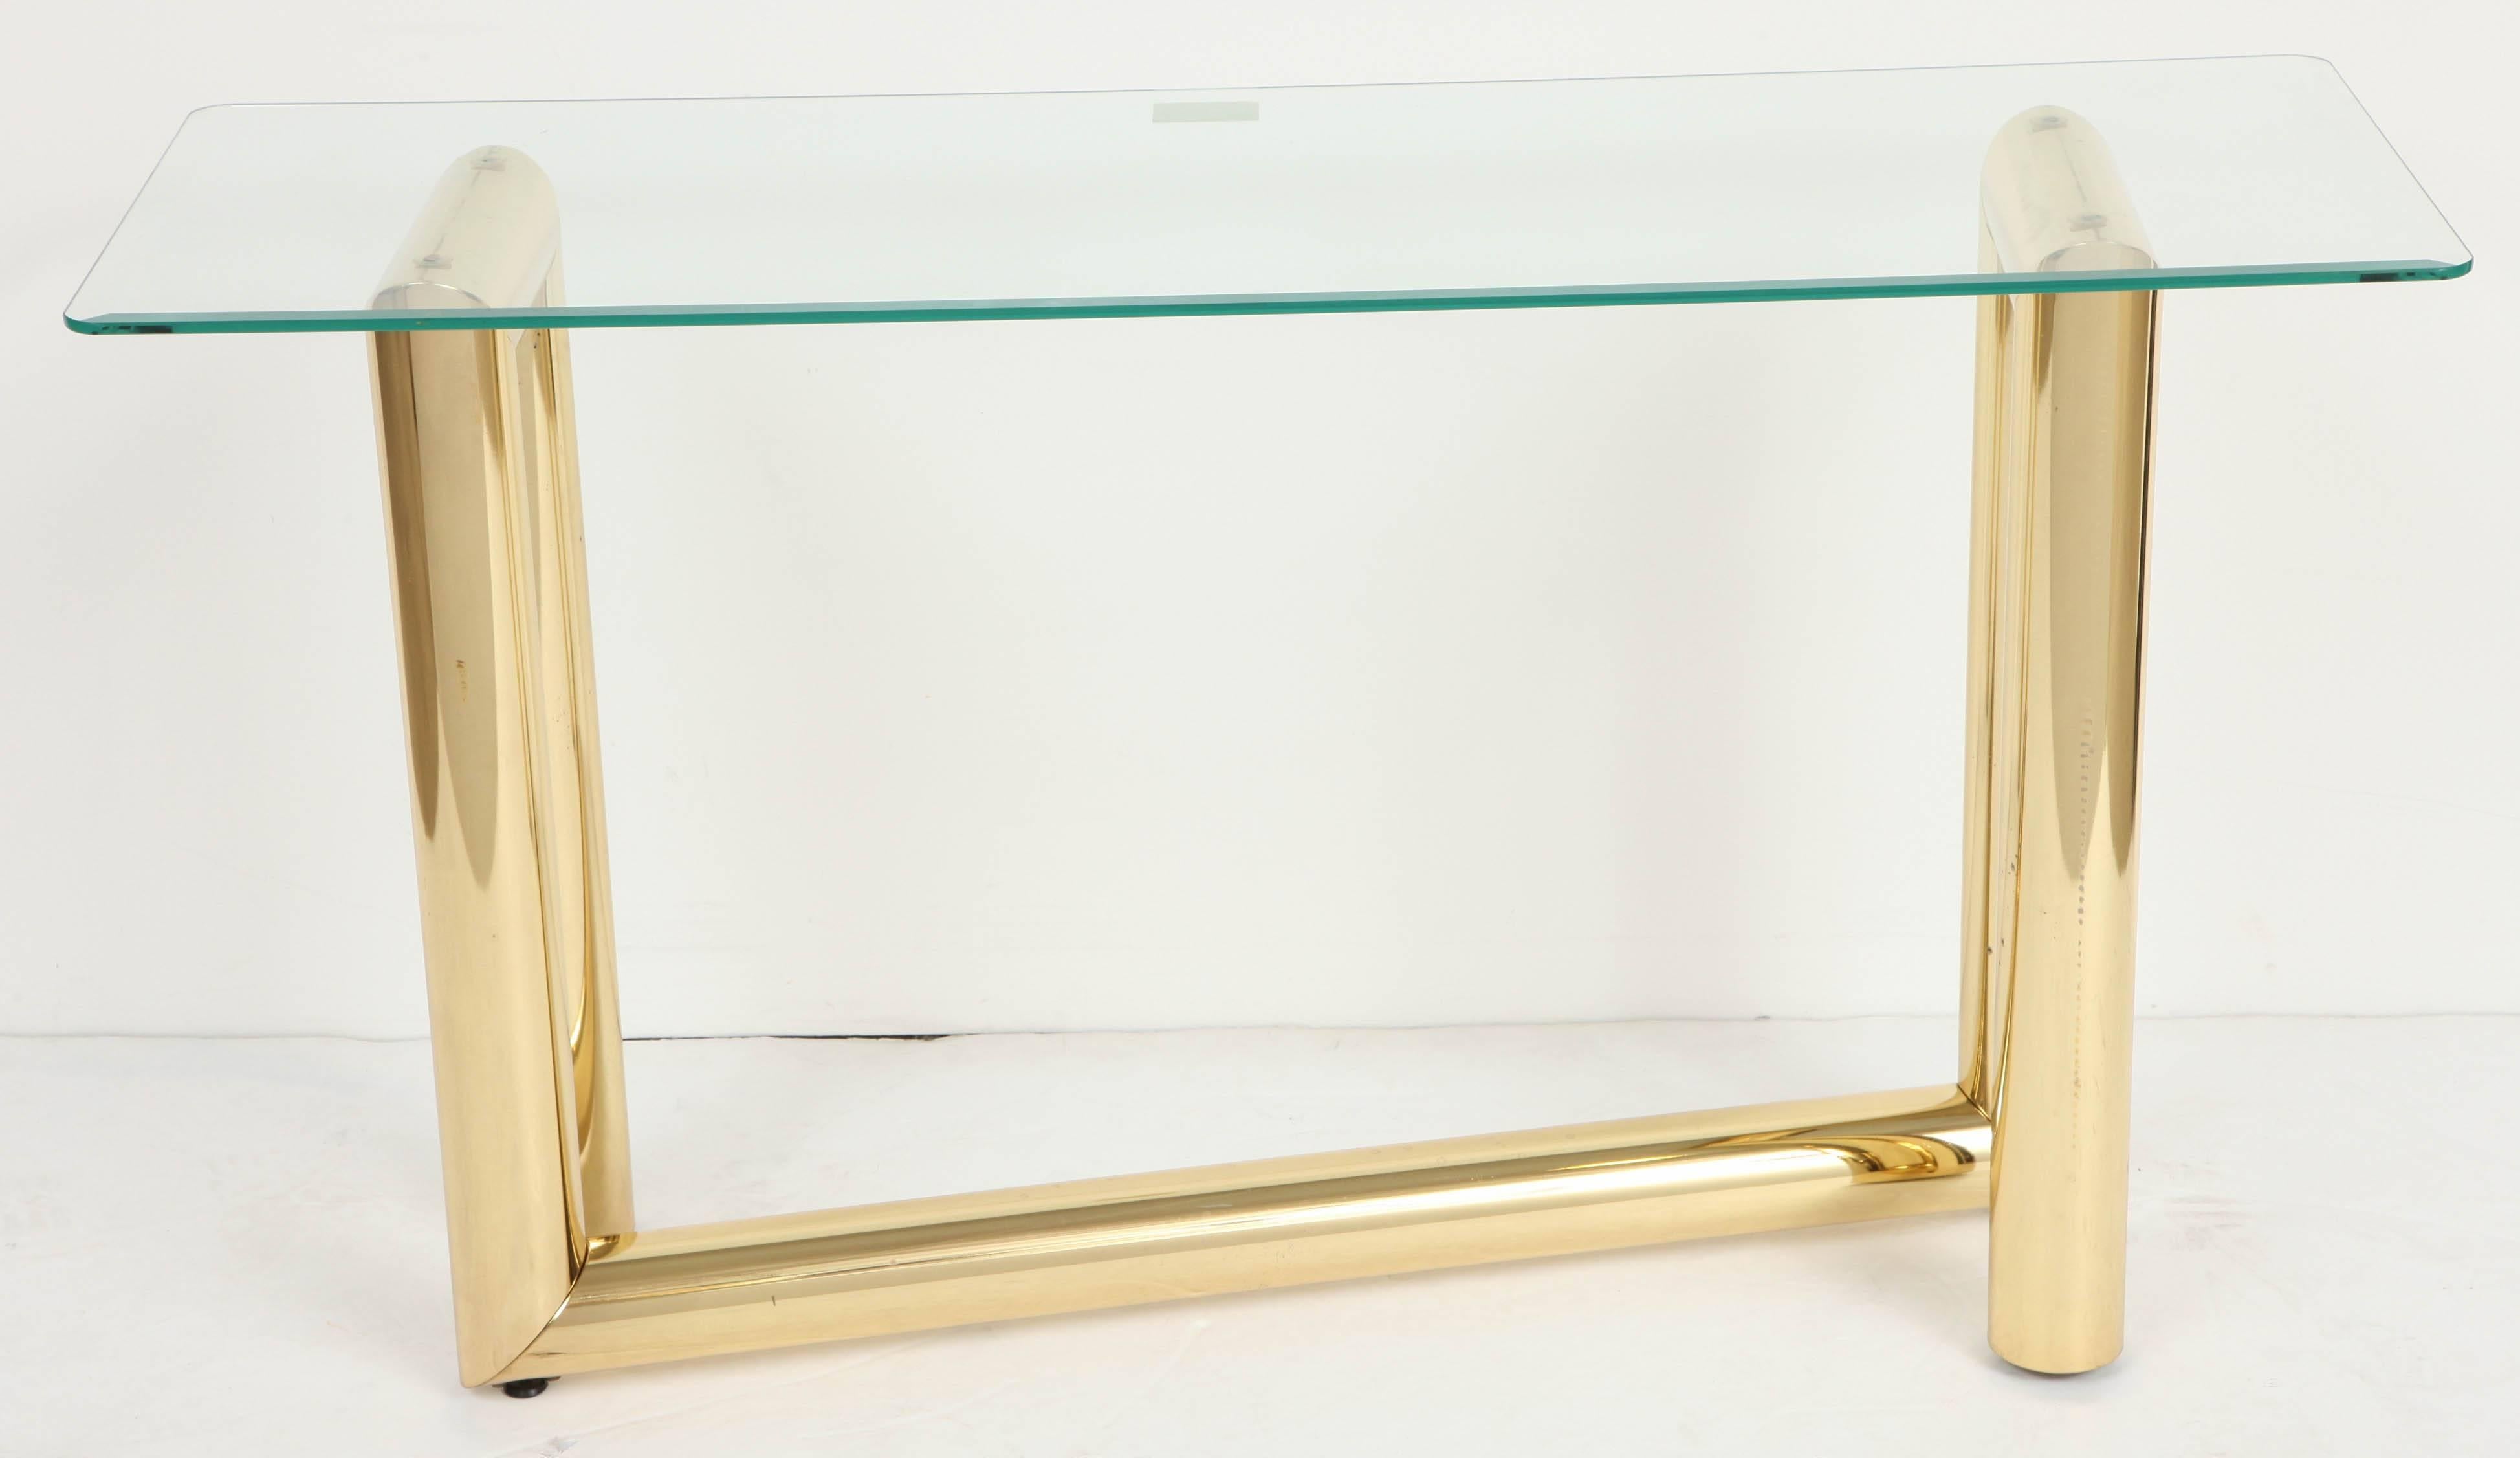 A Z-shaped brass and glass console table. USA, circa 1970.  Polished brass base supports a removable beveled edge glass top.  Item may be viewed at the 1stdibs 200 Lexington showroom.

Dimensions (inches):
Overall 48